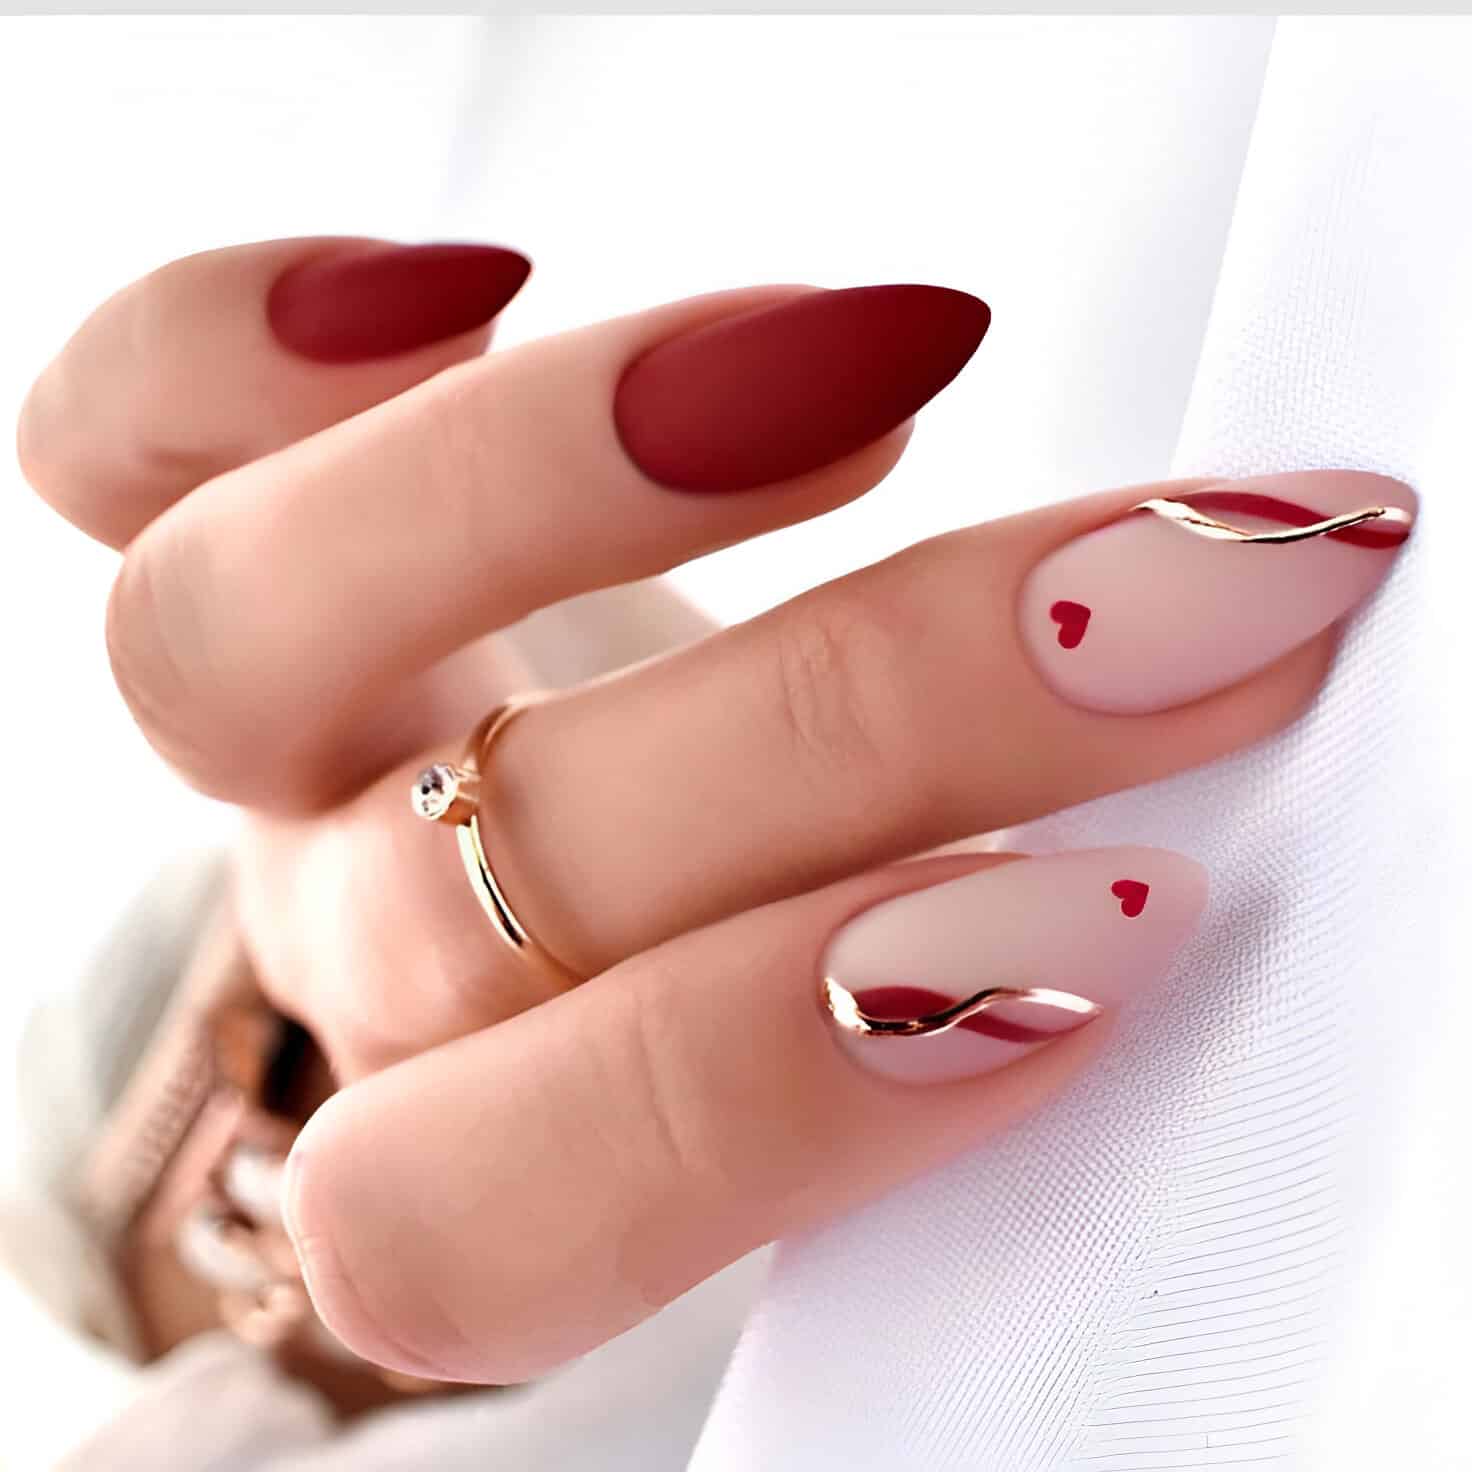 30 Irresistible Red Heart Nails For The Perfect Romantic Date 6